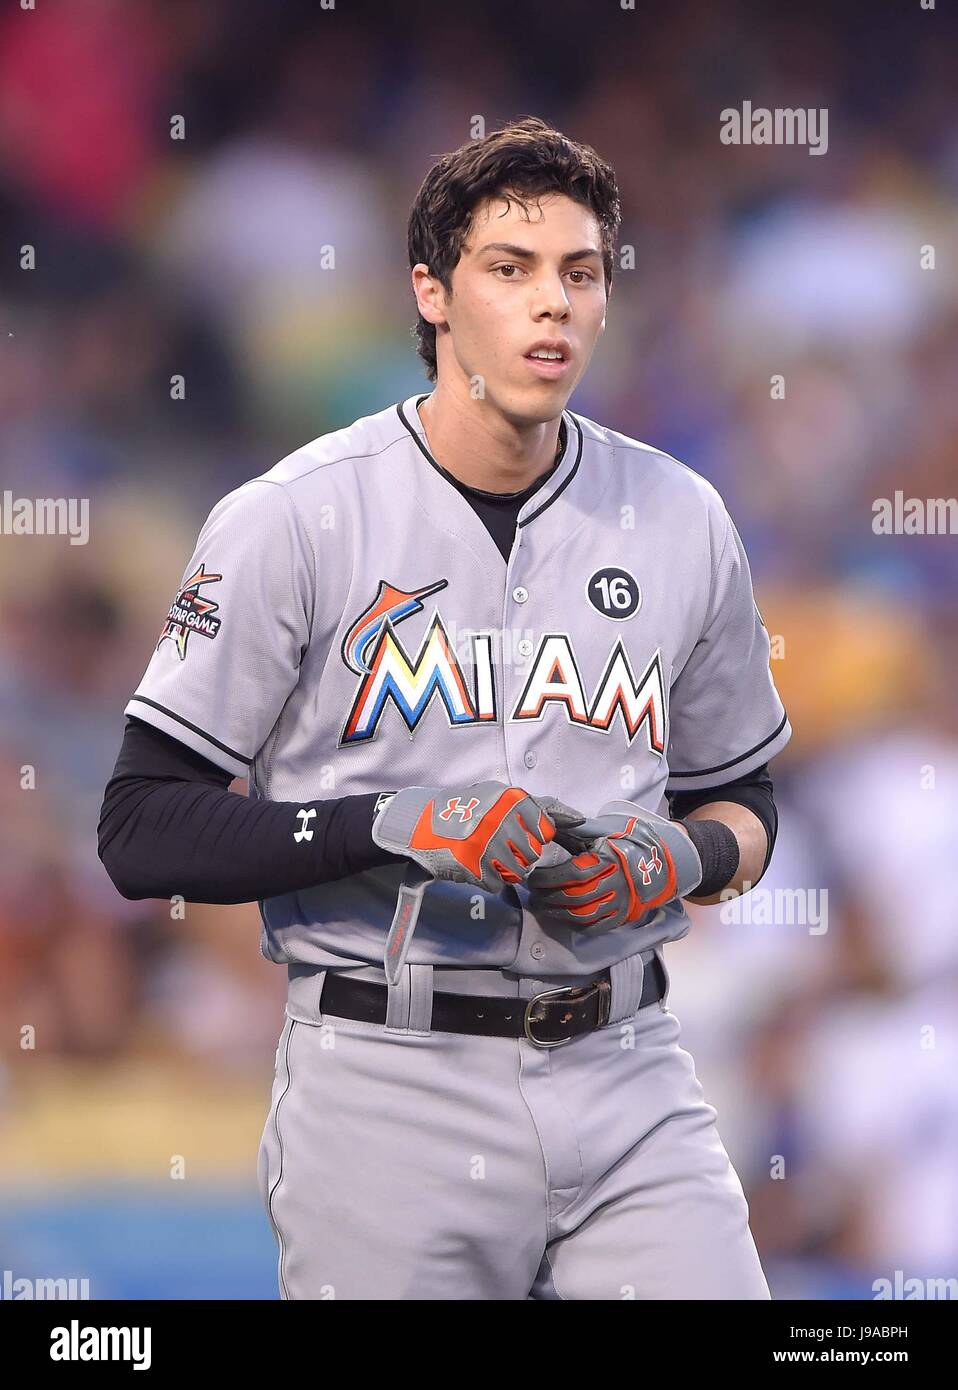 2013 Marlins Season Review: Christian Yelich - Fish Stripes